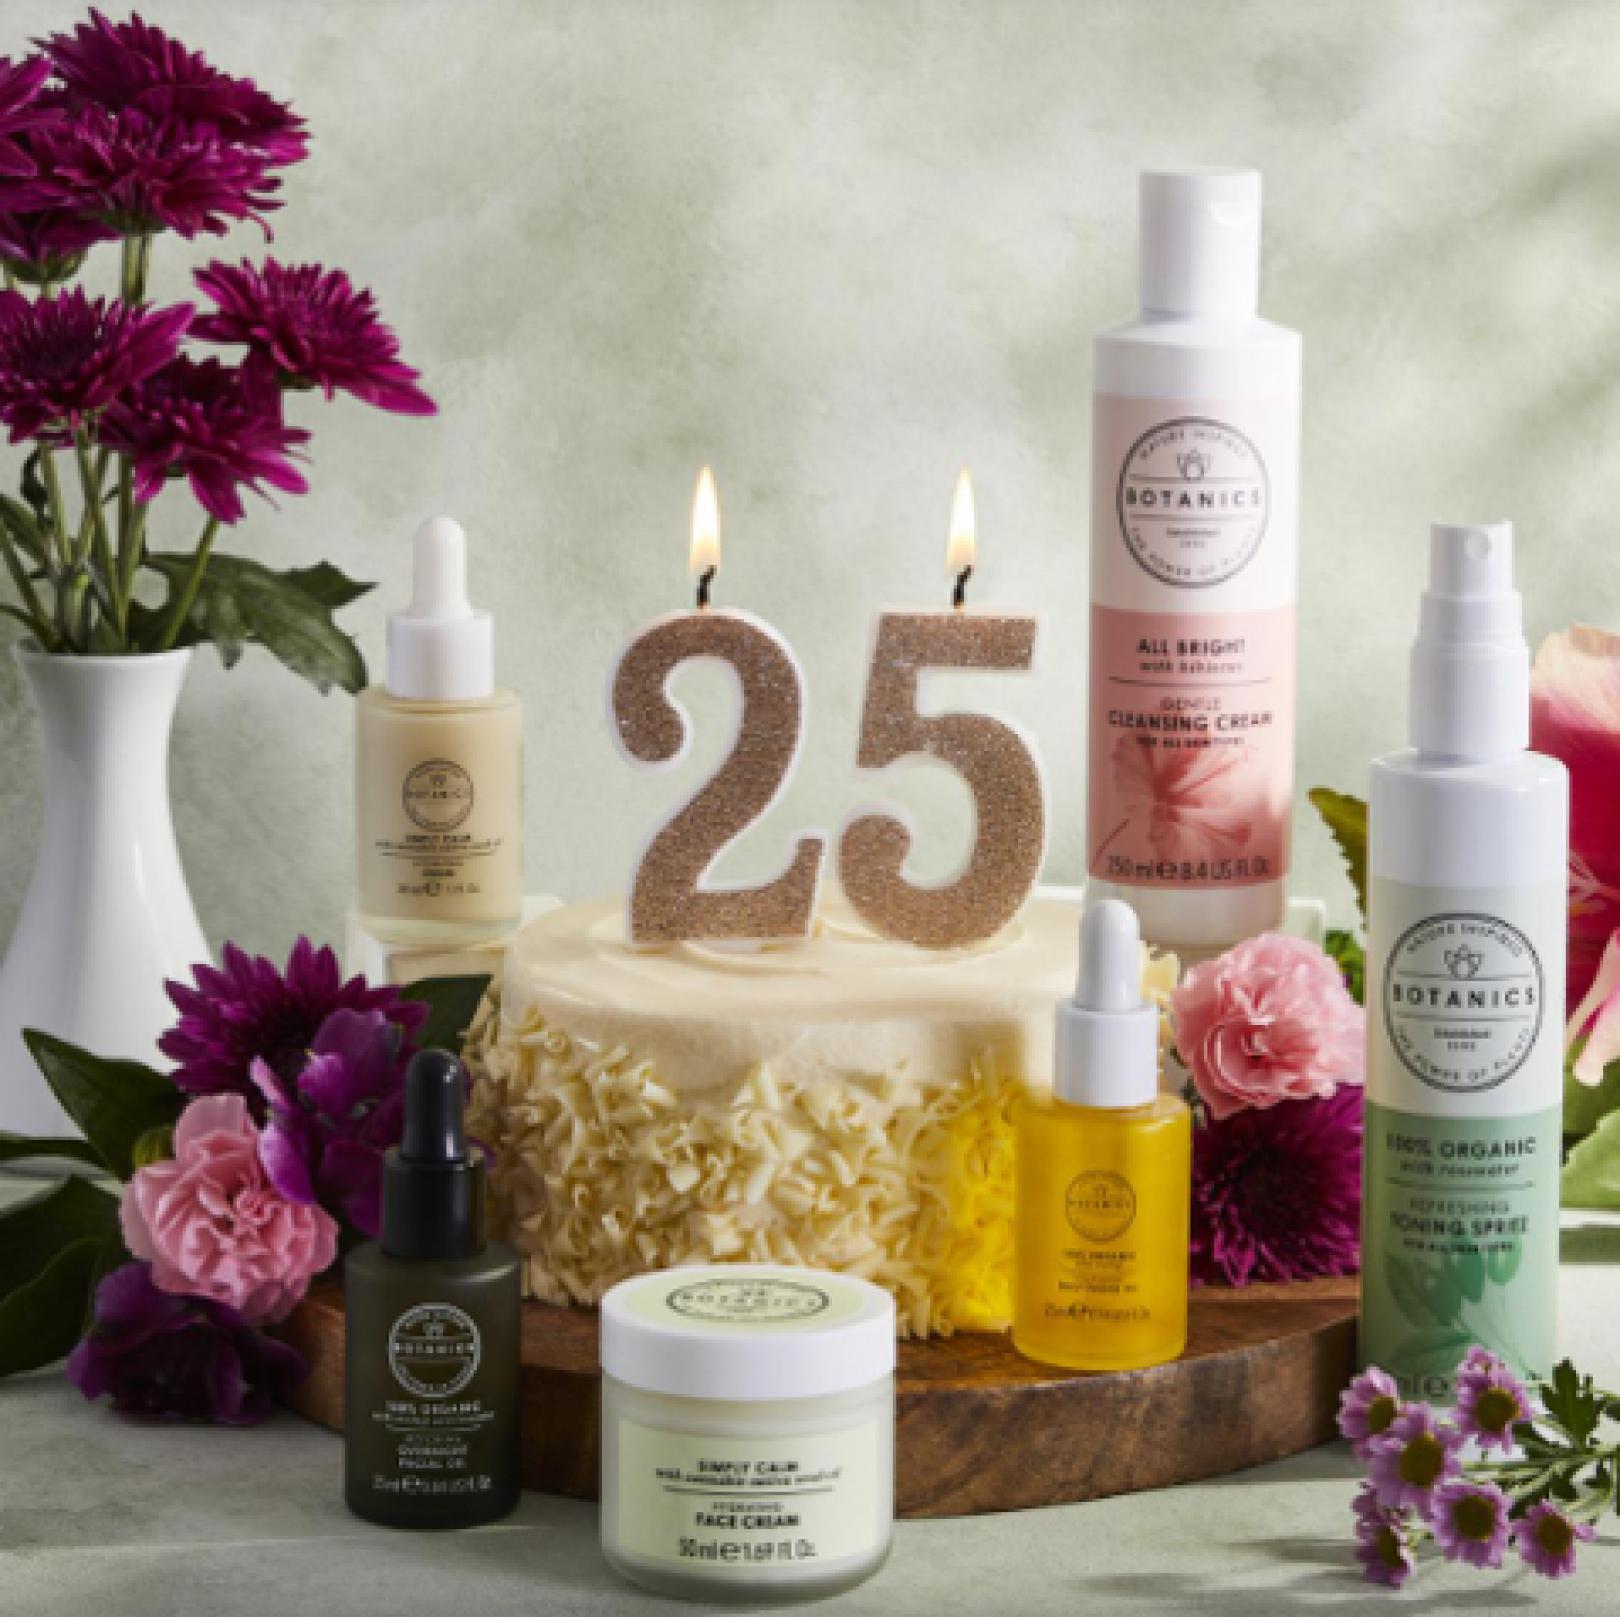 Display of Botanics products with celebration candles